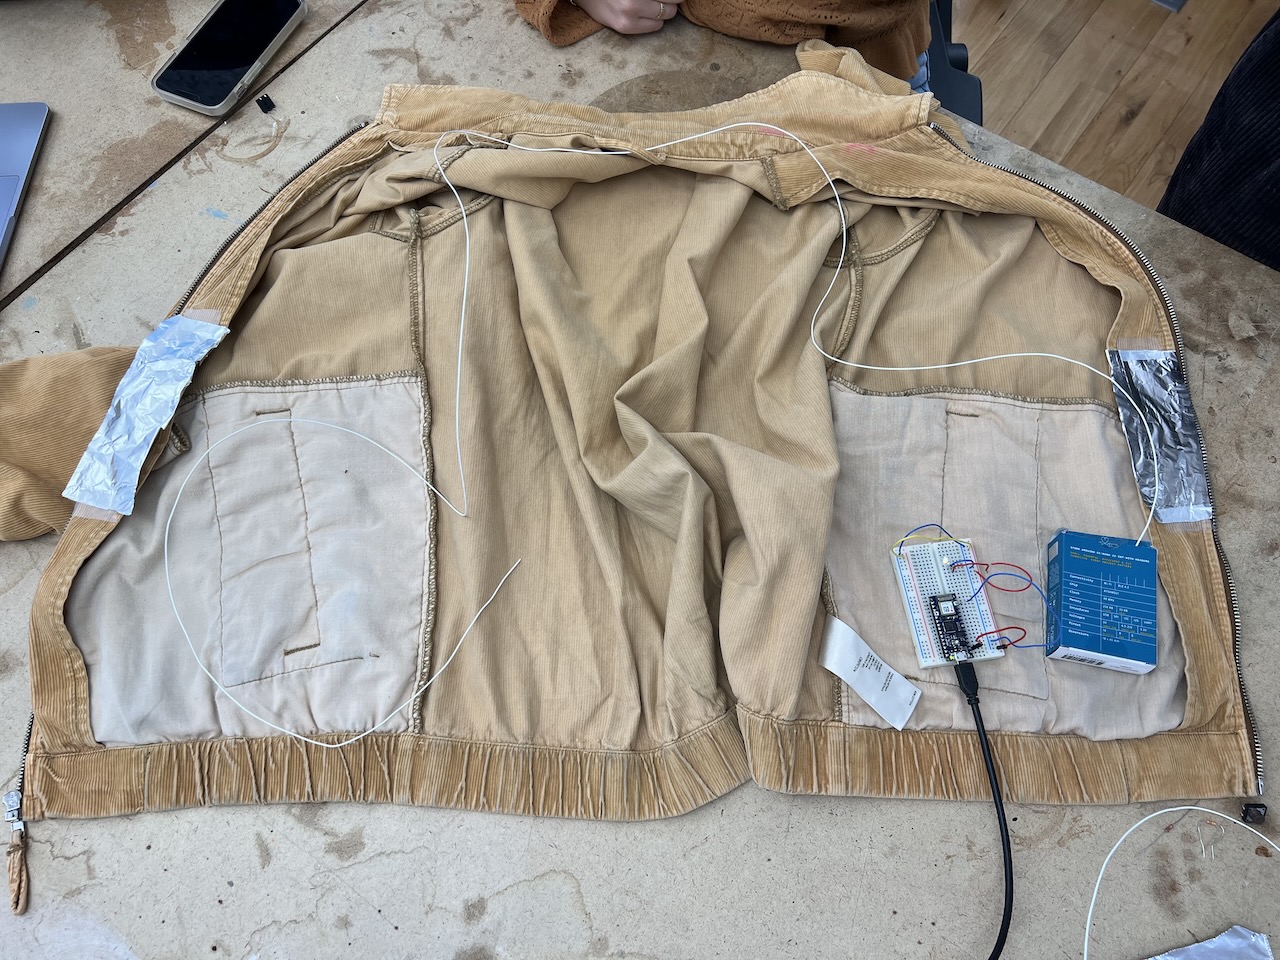 Jacket with wiring inside it